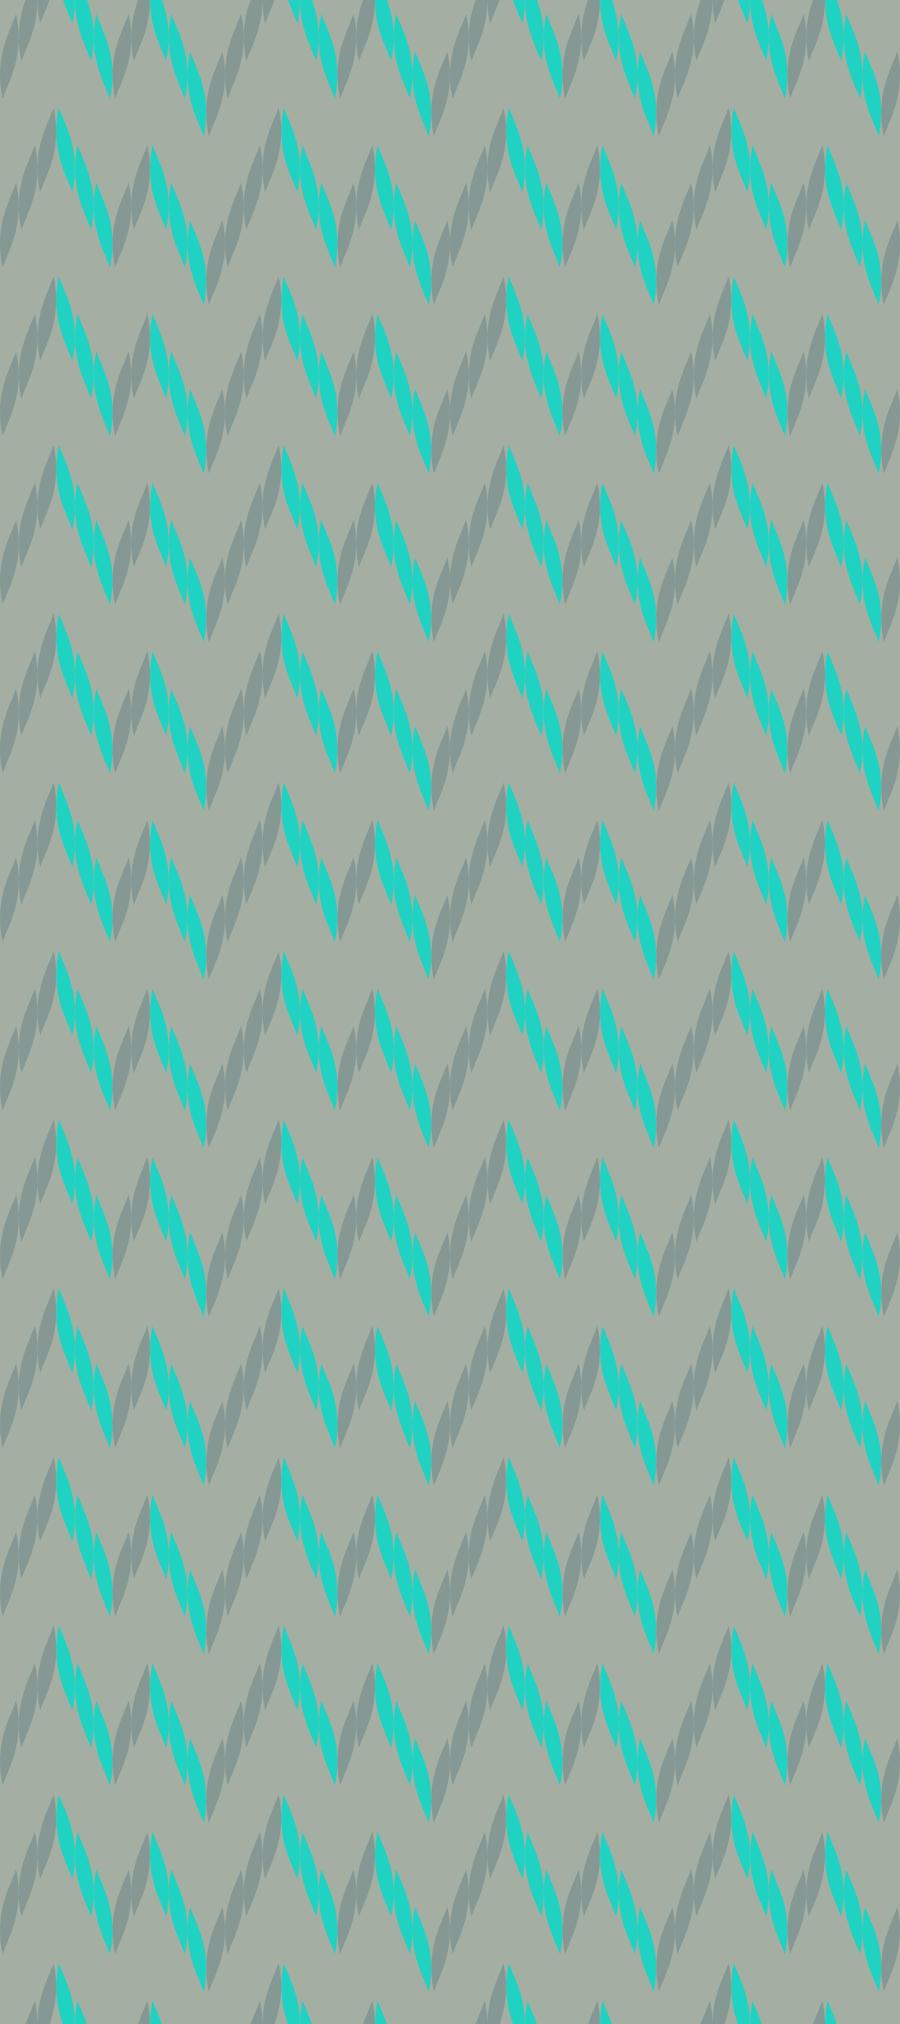 Related Pictures Gray And White Diagonal Stripes Background Seamless